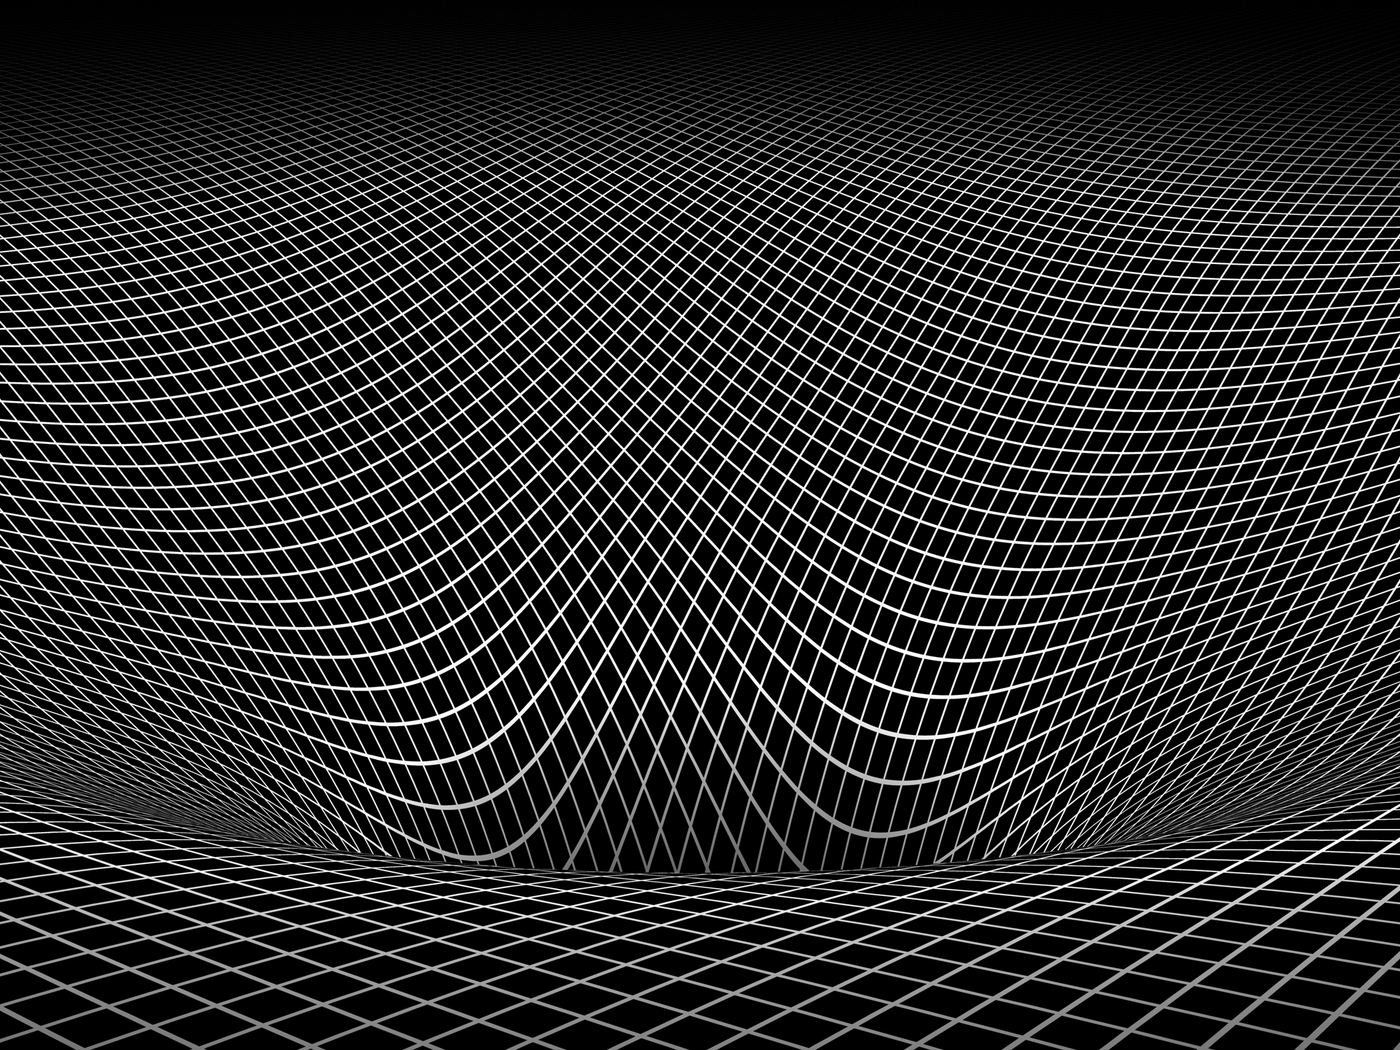 Image: Mesh, checkered, depression, gravity, curvature, space, space, visualization